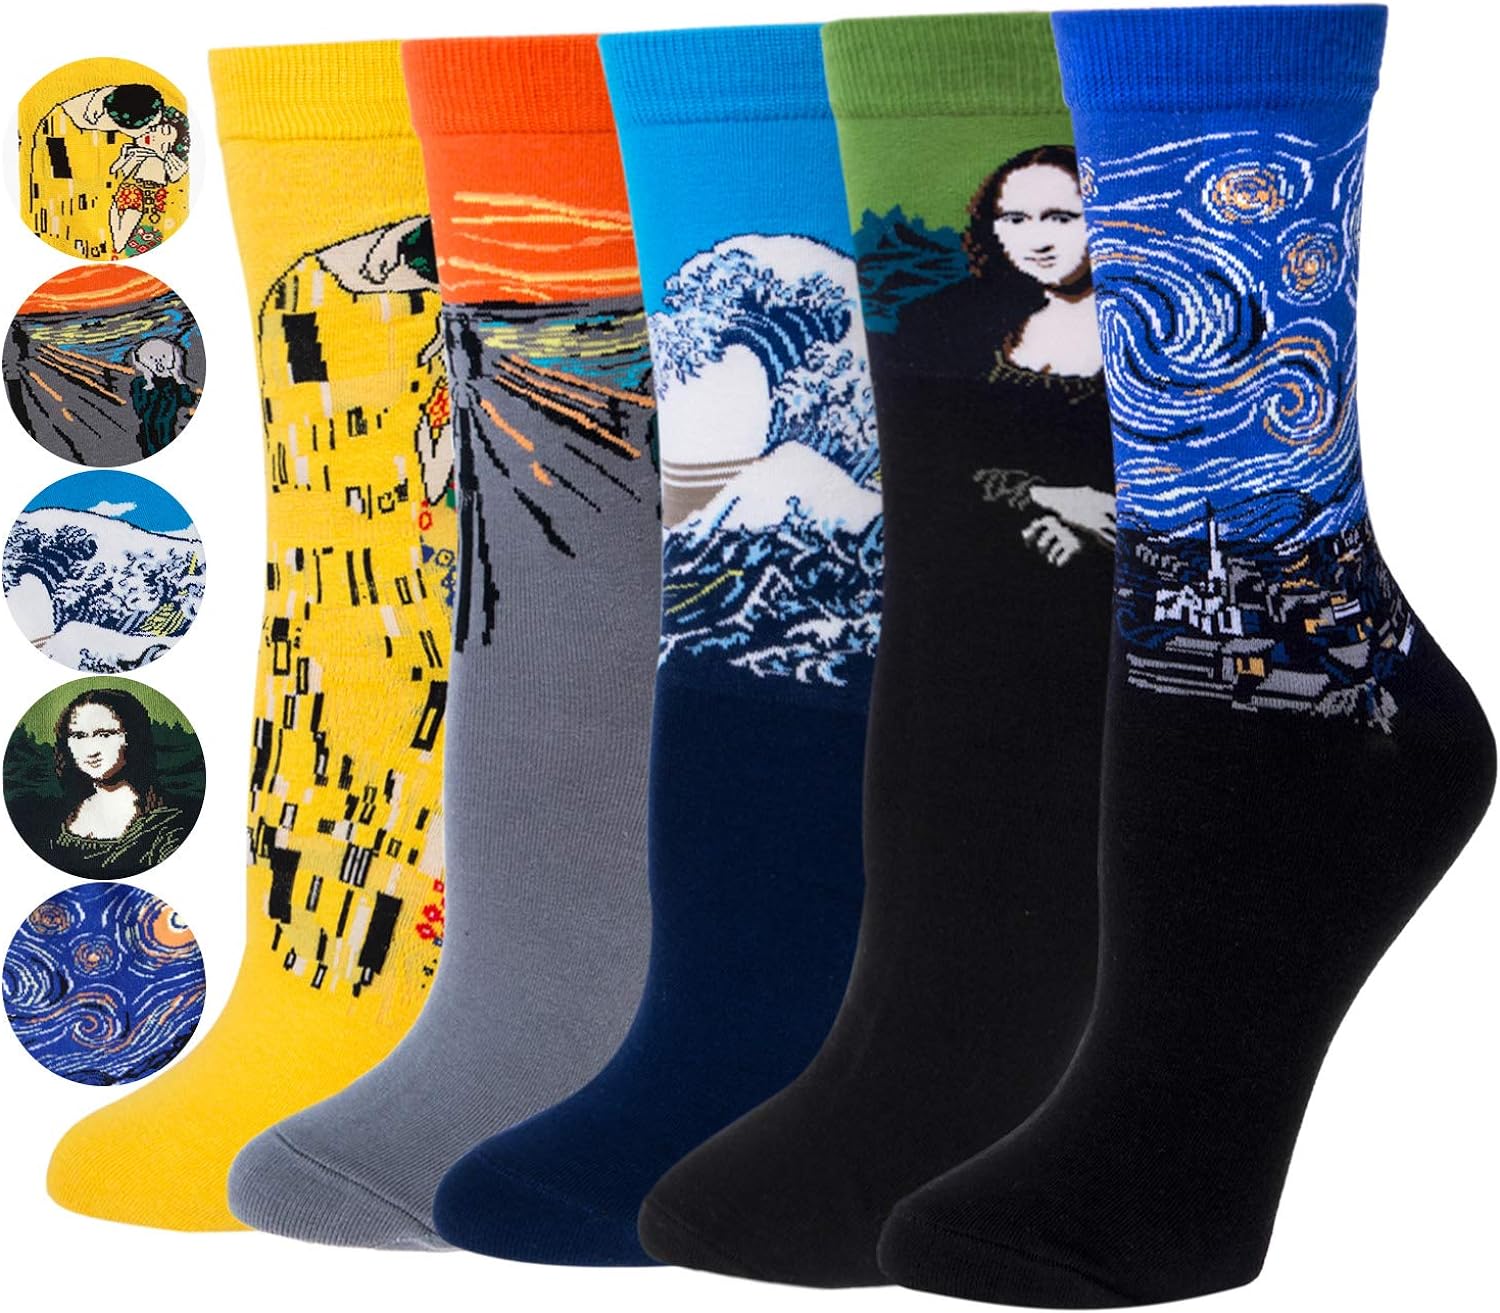 Justay Comf 5 Pairs Mens Socks Novelty Painting Cotton Art Socks Funny Gifts for Men One Size